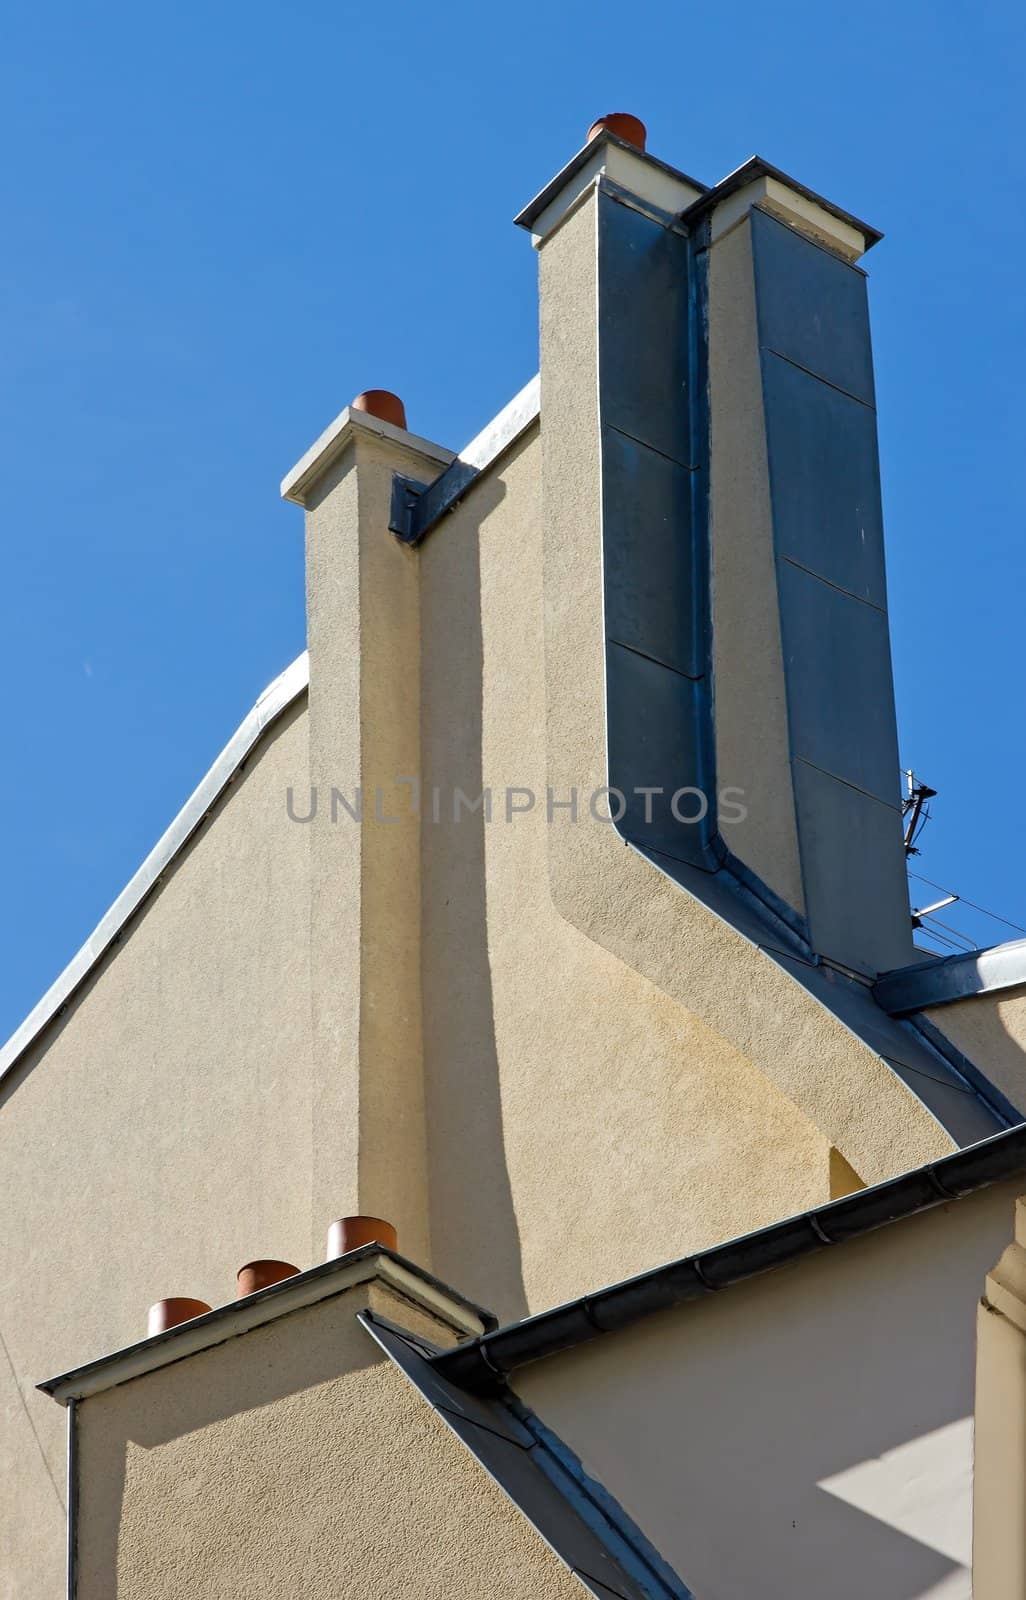 chimneys and walls, forming a geometric structure  Paris France